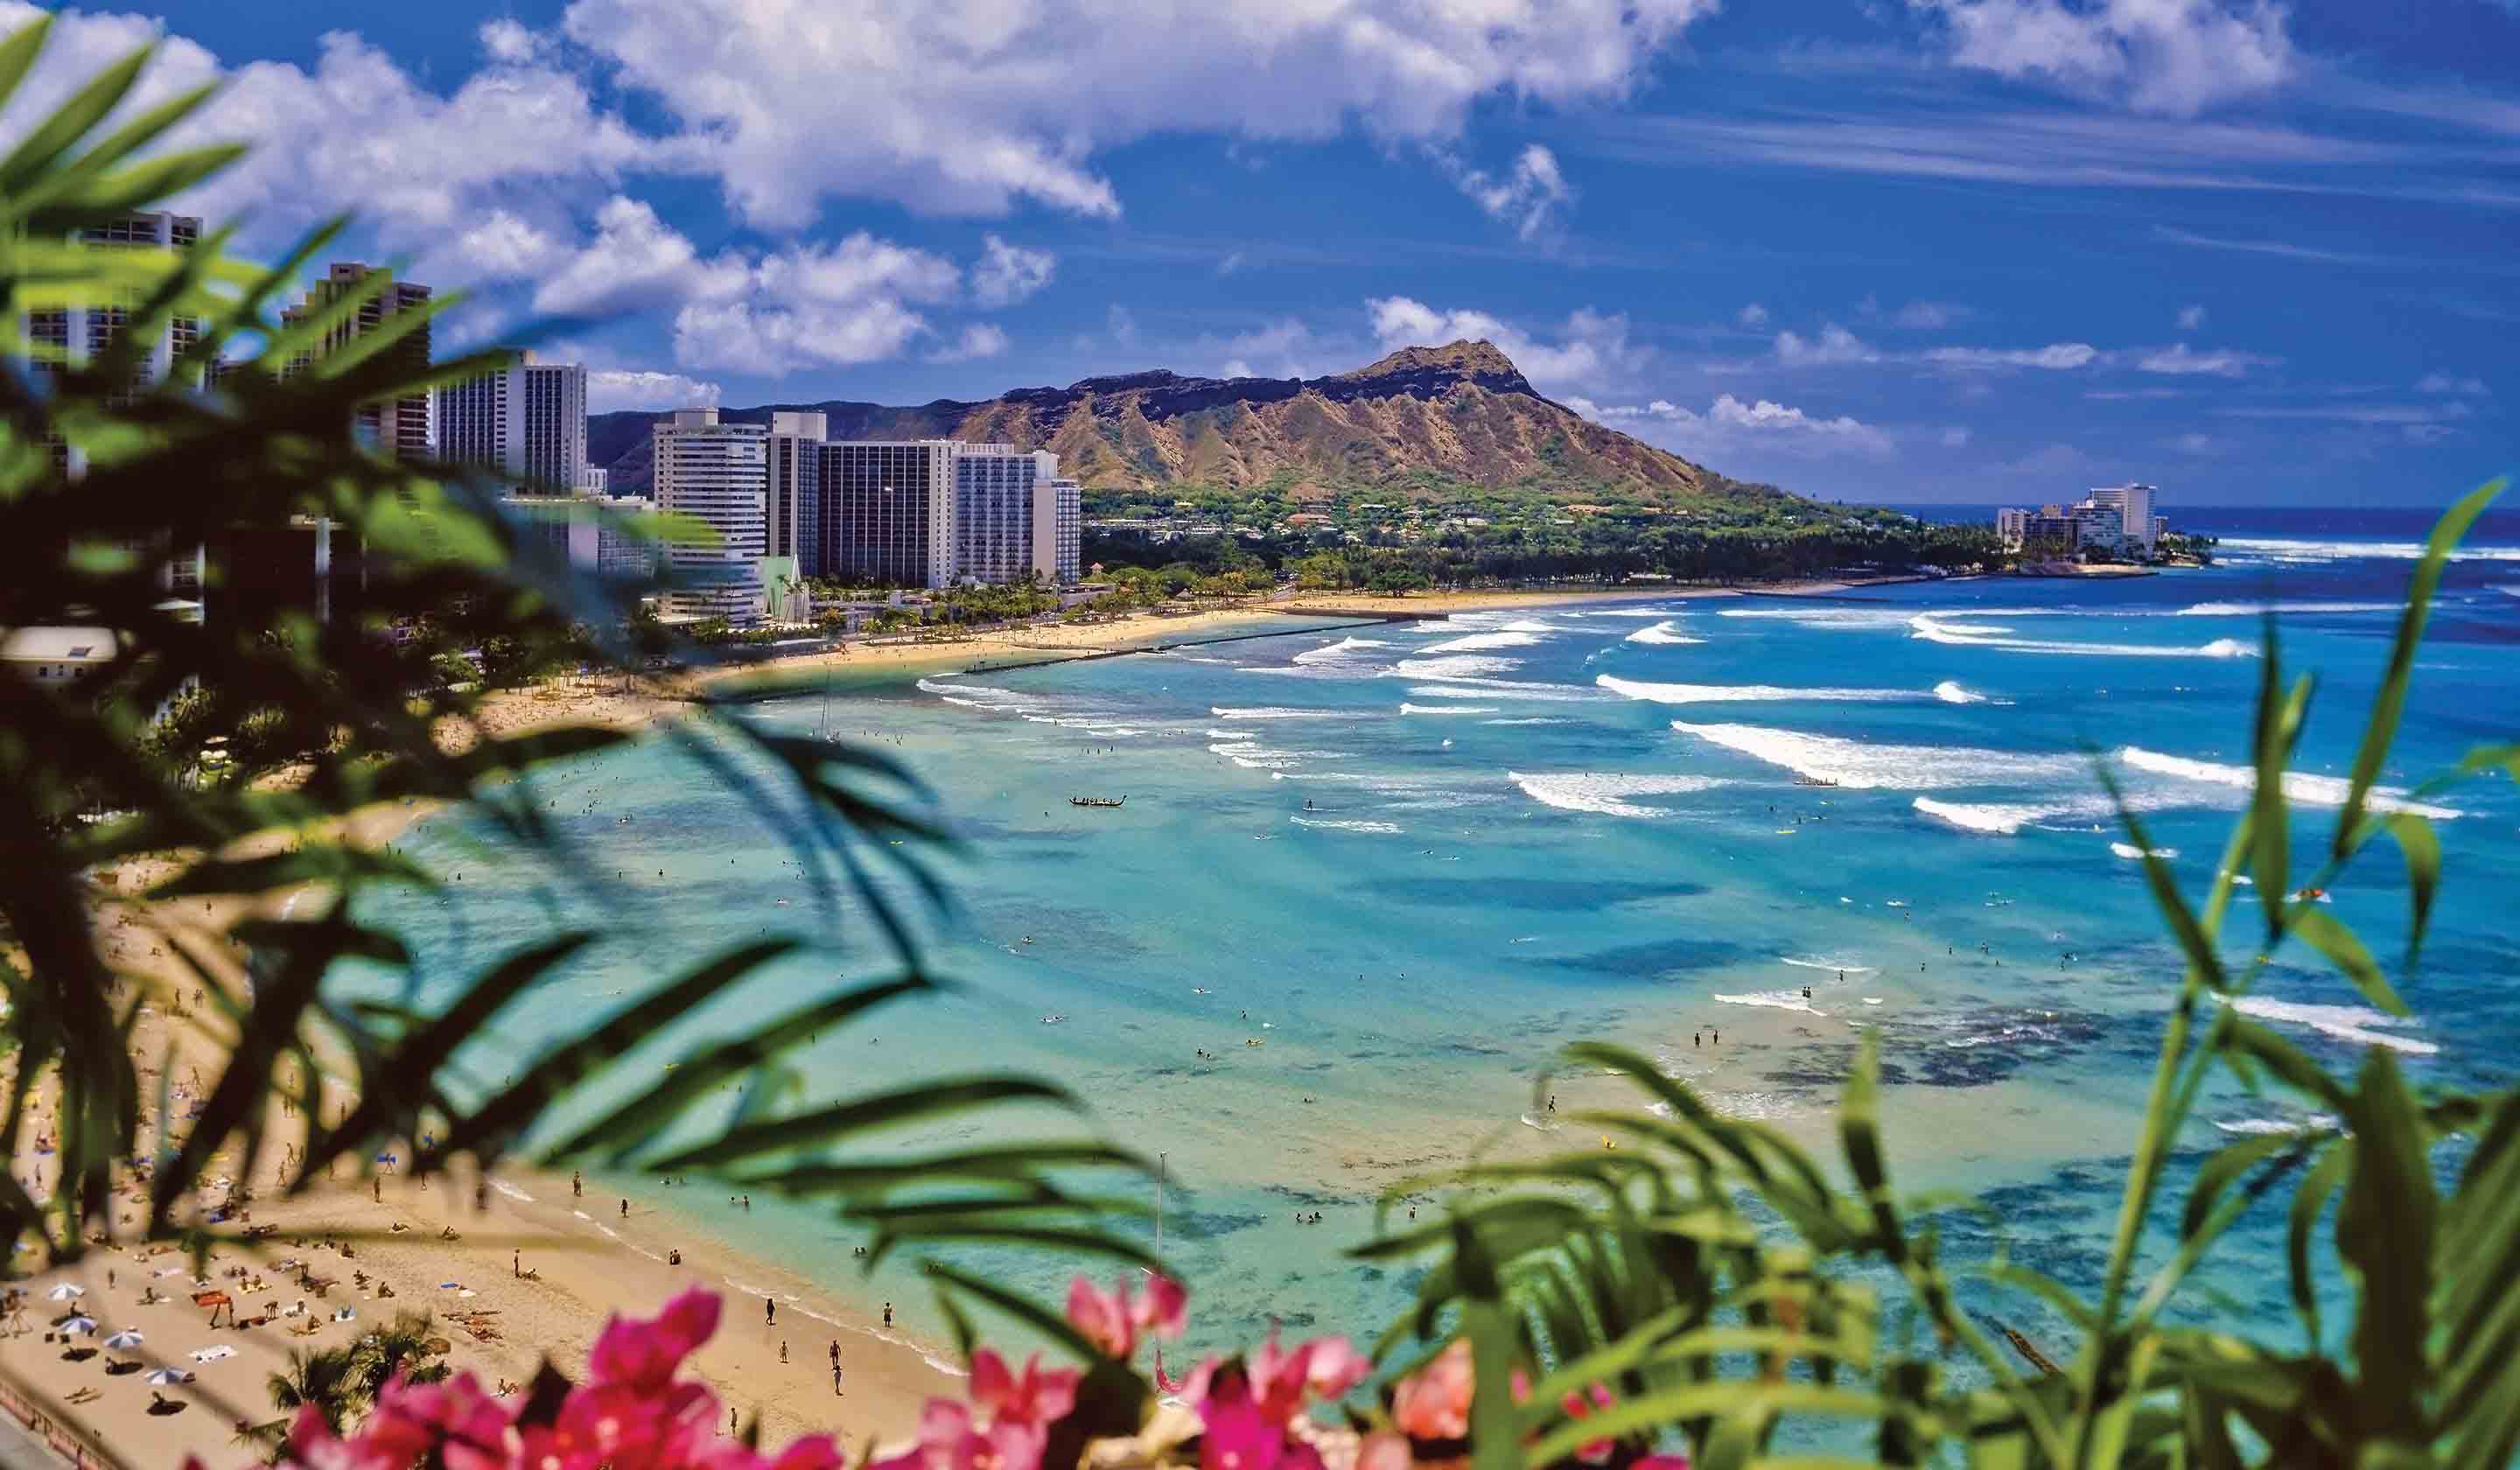 The Best of Hawaii